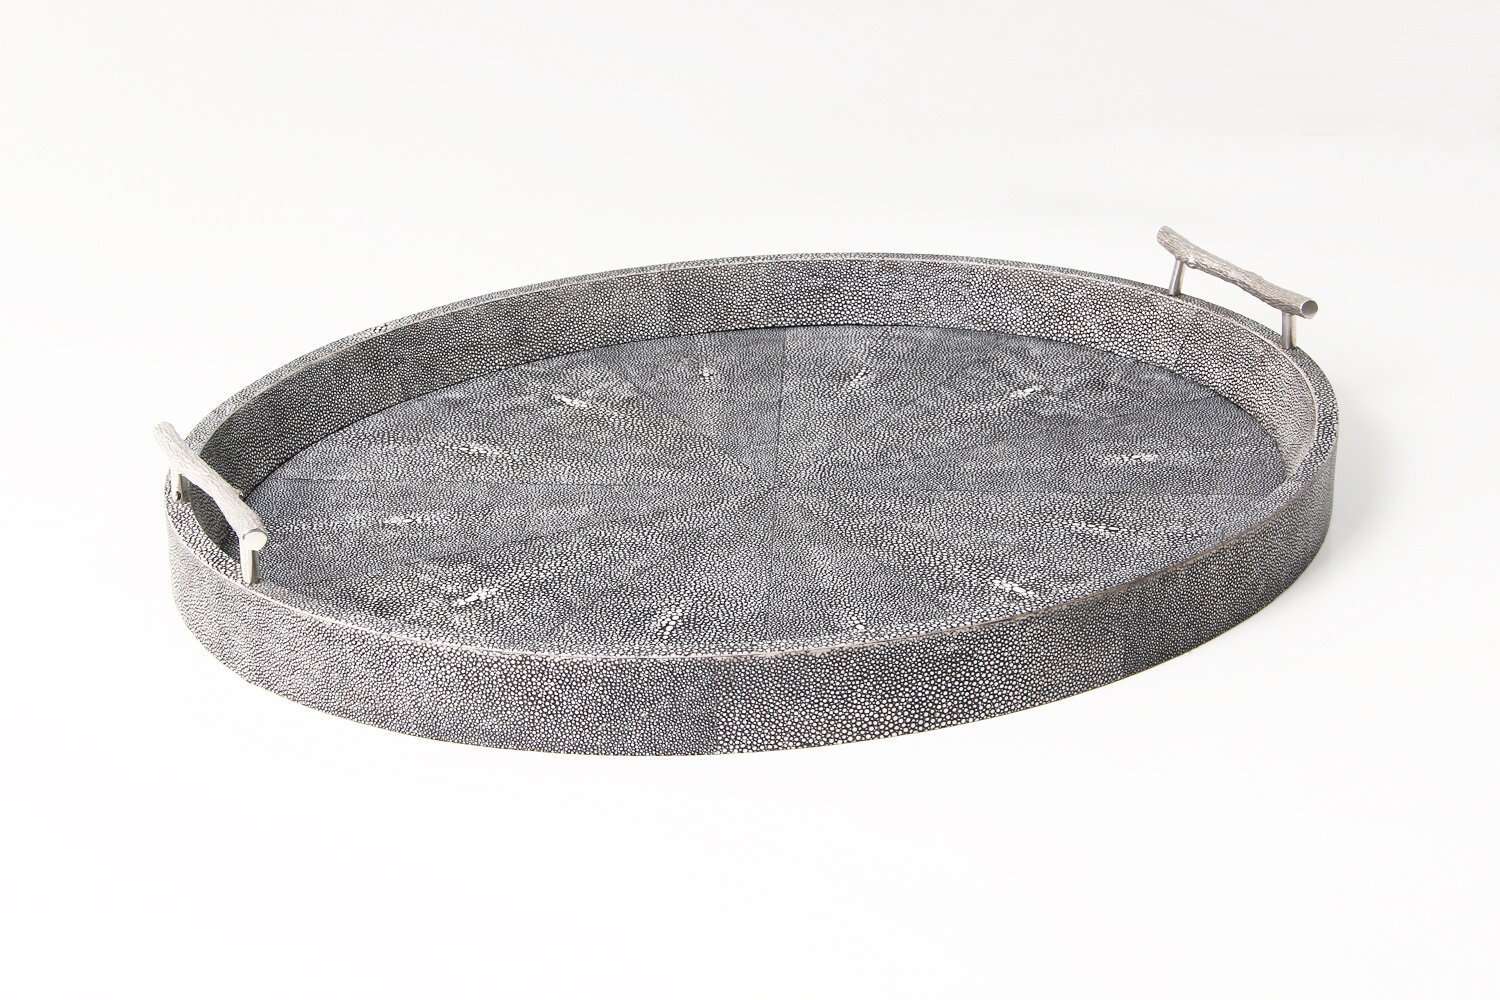 Serving tray Forwood Design grey shagreen drinks tray